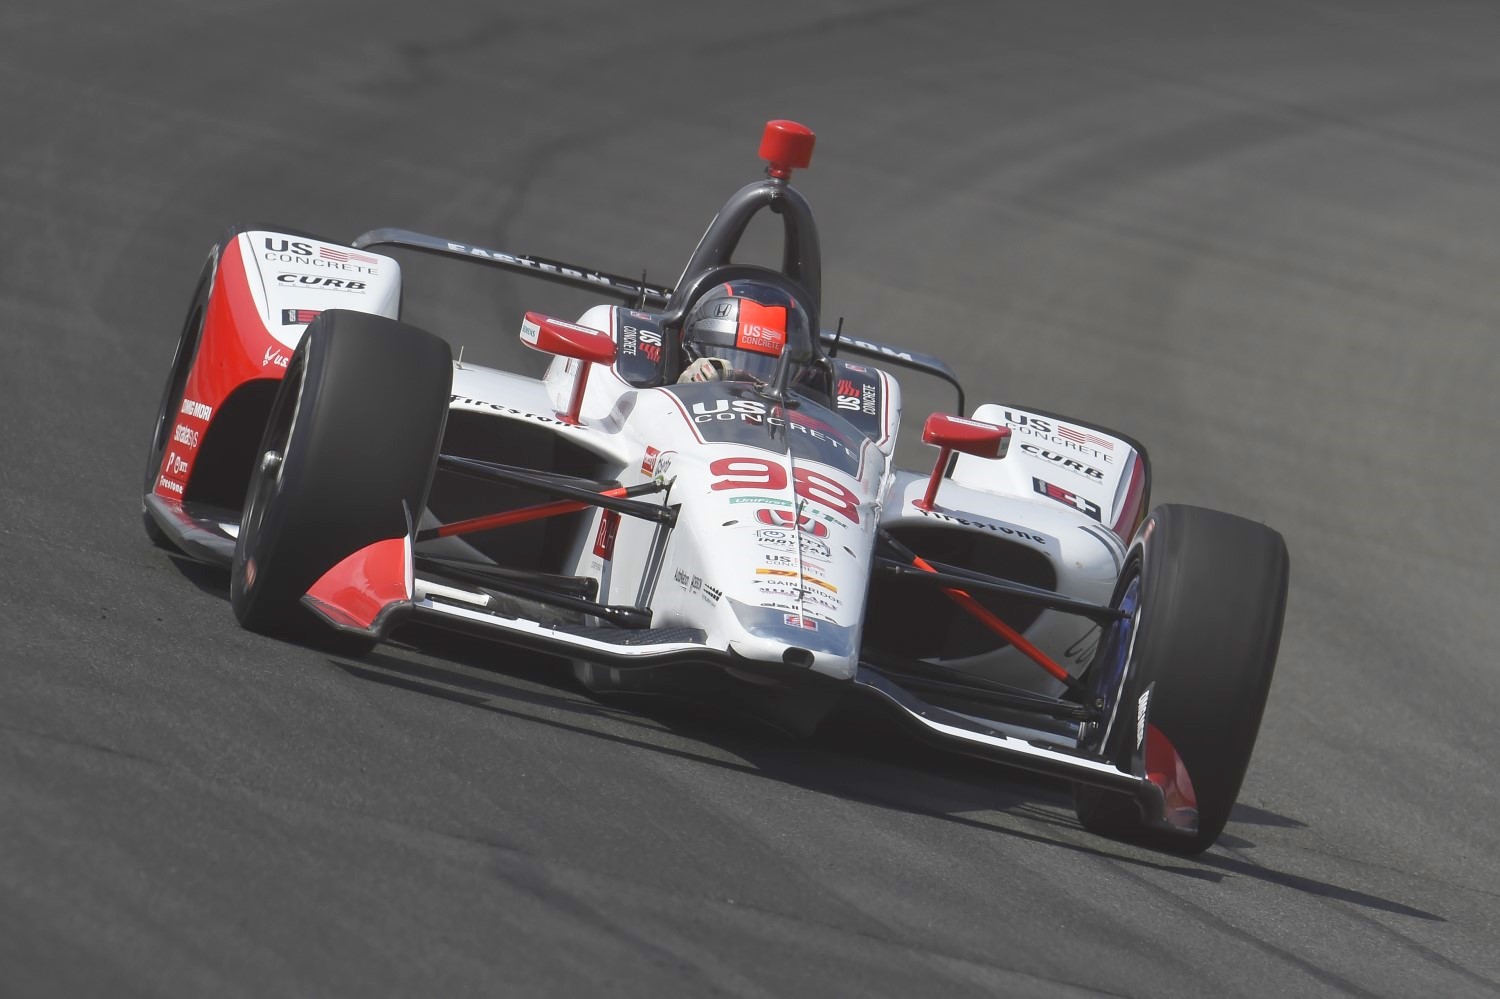 Yes again, Marco Andretti had a terrible race